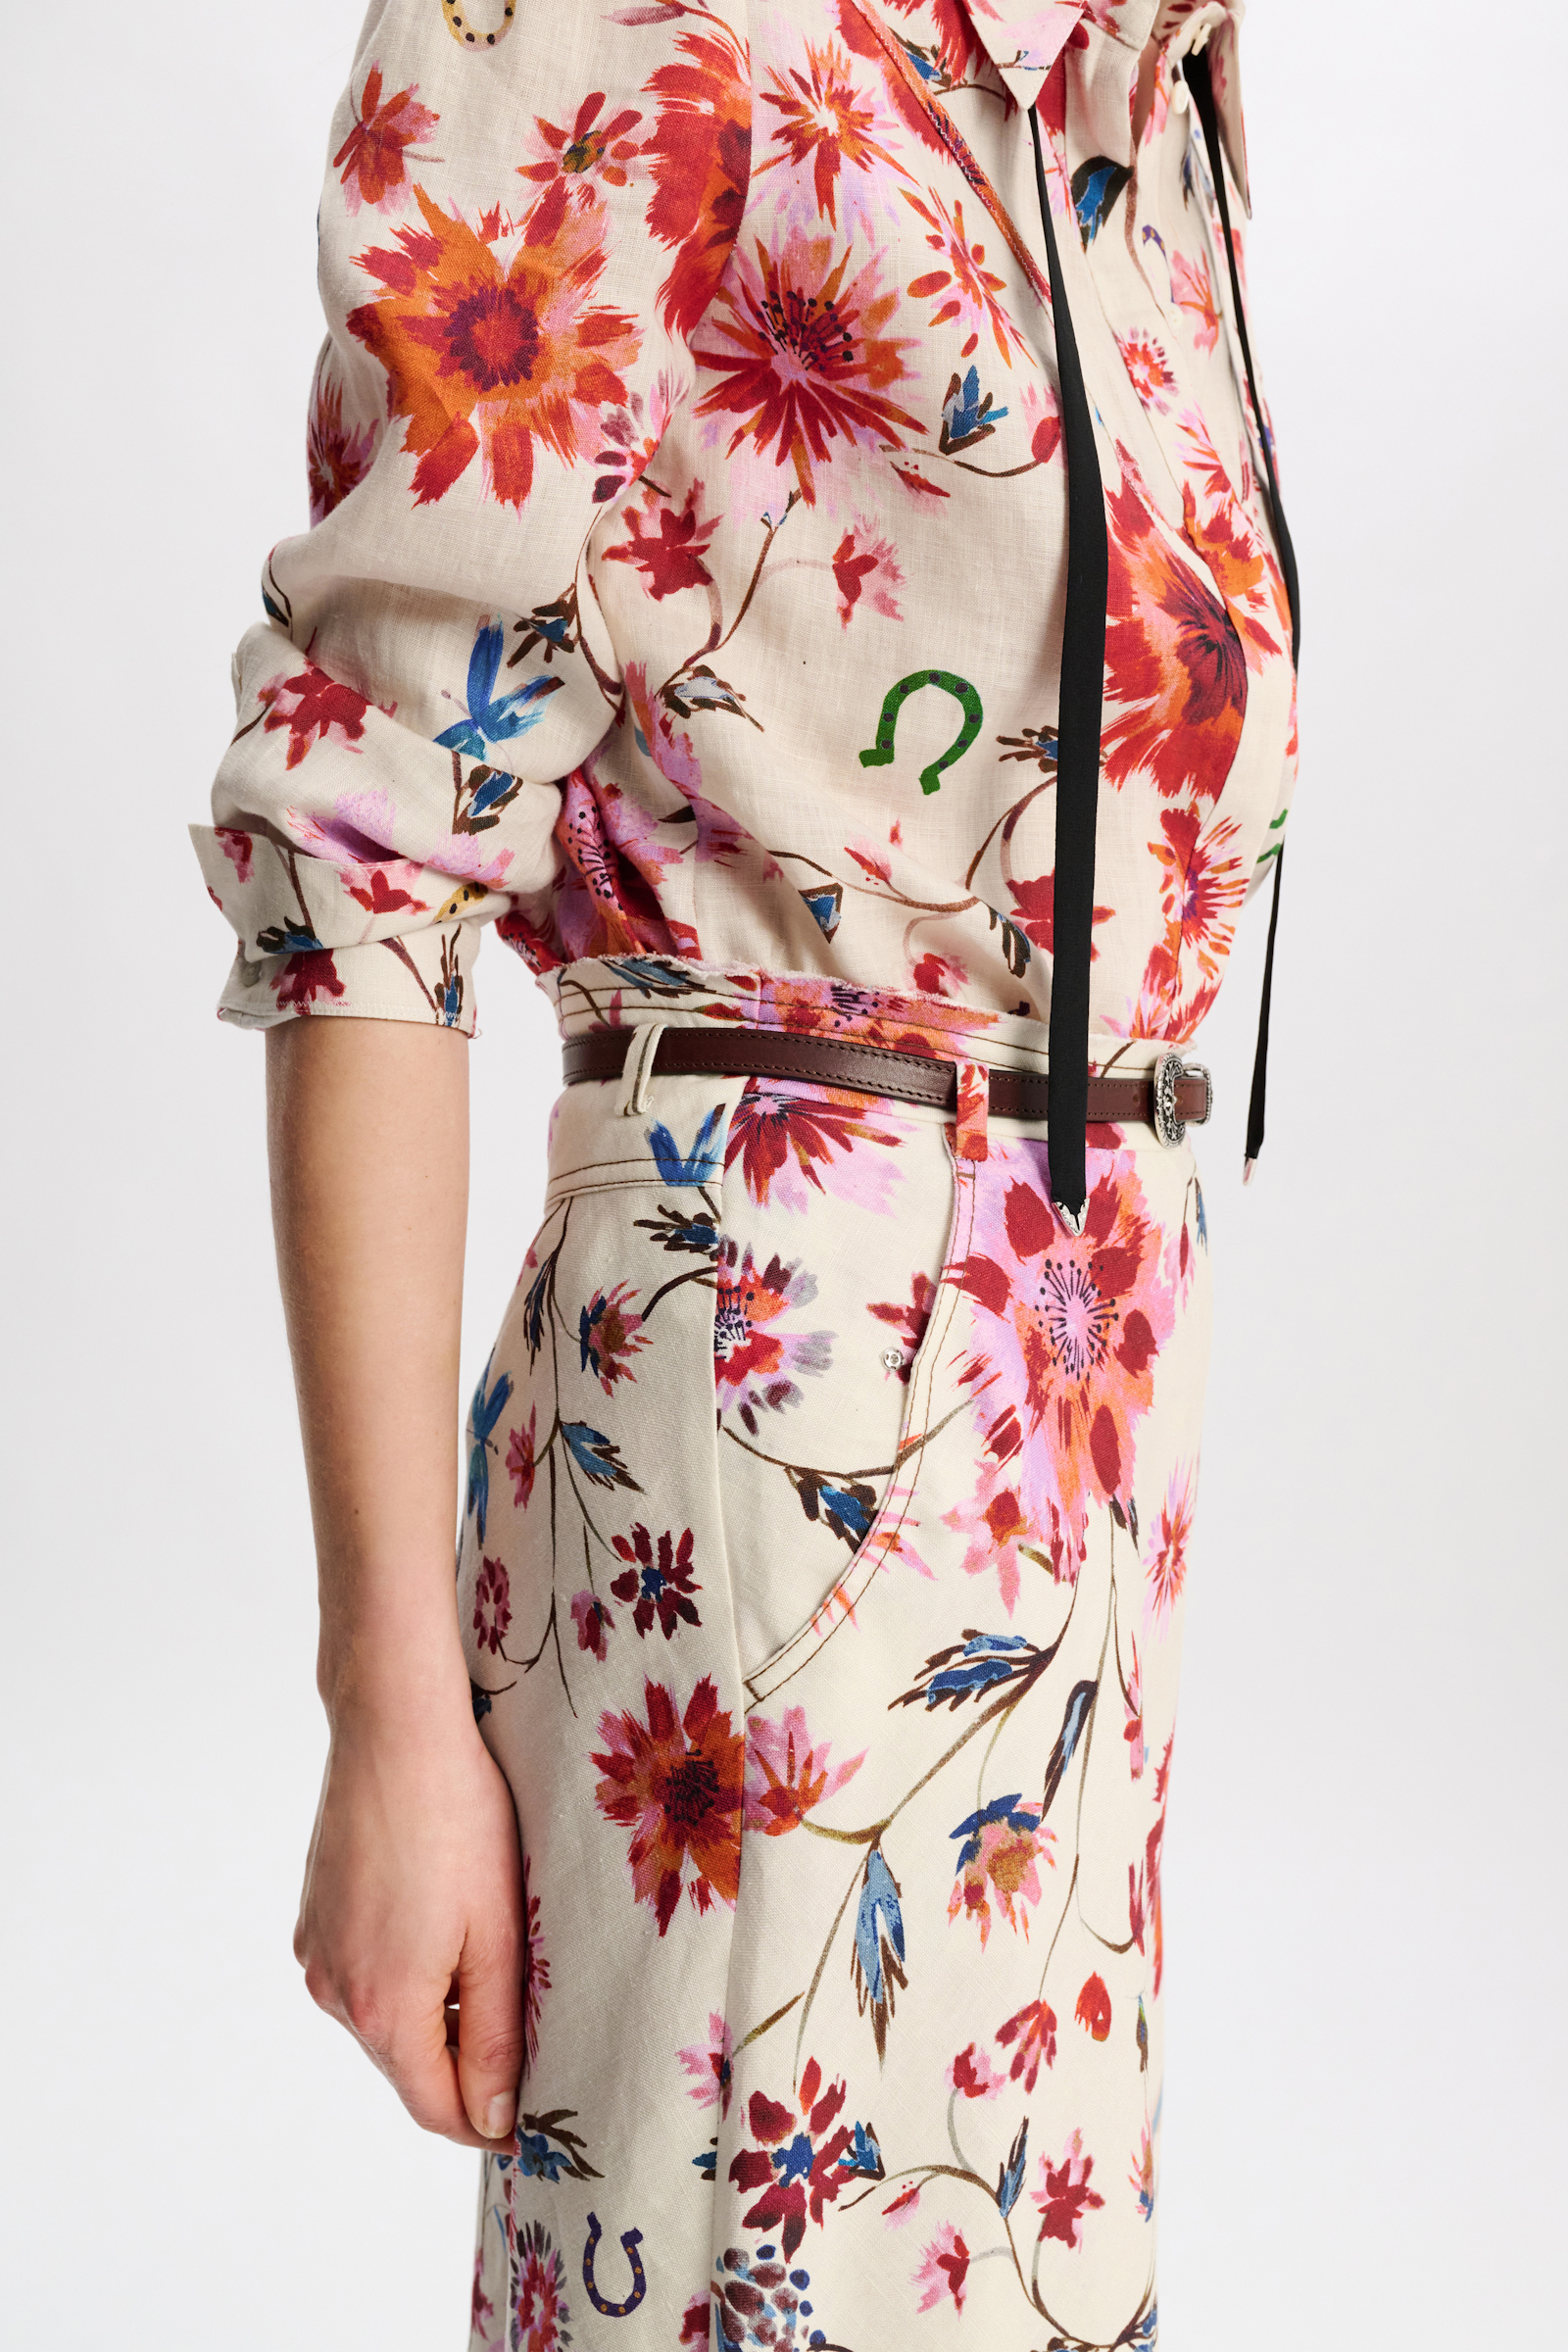 Dorothee Schumacher Printed linen skirt with removable leather tie belt floral mix